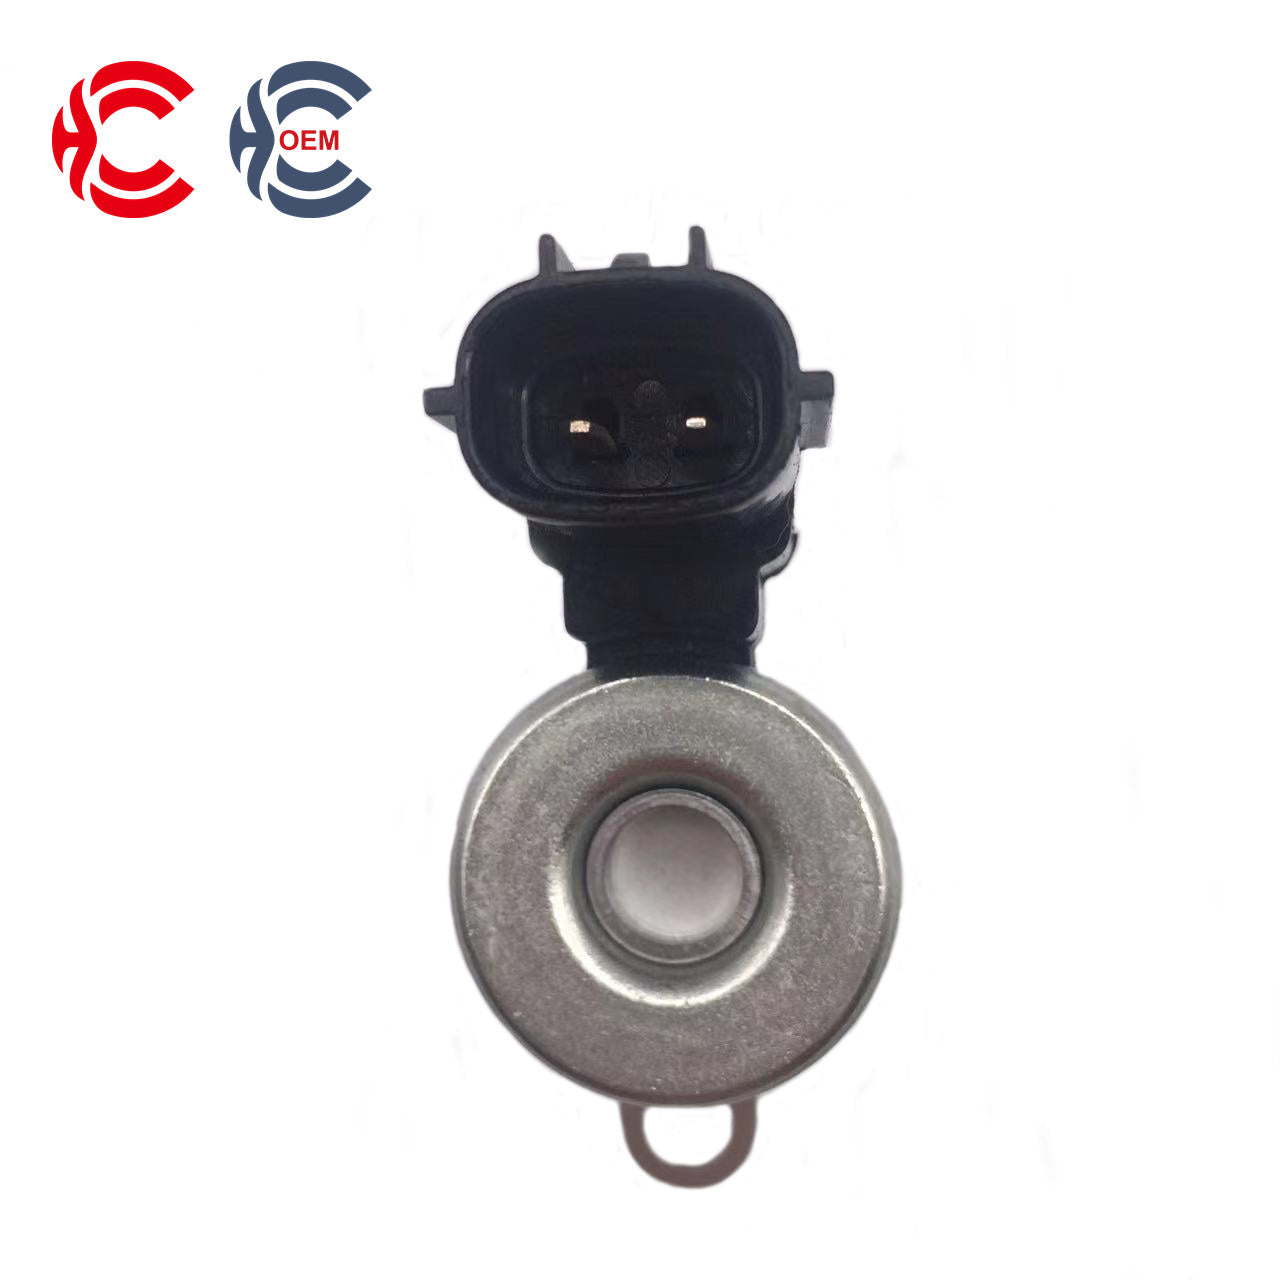 OEM: 1028A021Material: ABS metalColor: black silverOrigin: Made in ChinaWeight: 300gPacking List: 1* VVT Solenoid Valve More ServiceWe can provide OEM Manufacturing serviceWe can Be your one-step solution for Auto PartsWe can provide technical scheme for you Feel Free to Contact Us, We will get back to you as soon as possible.